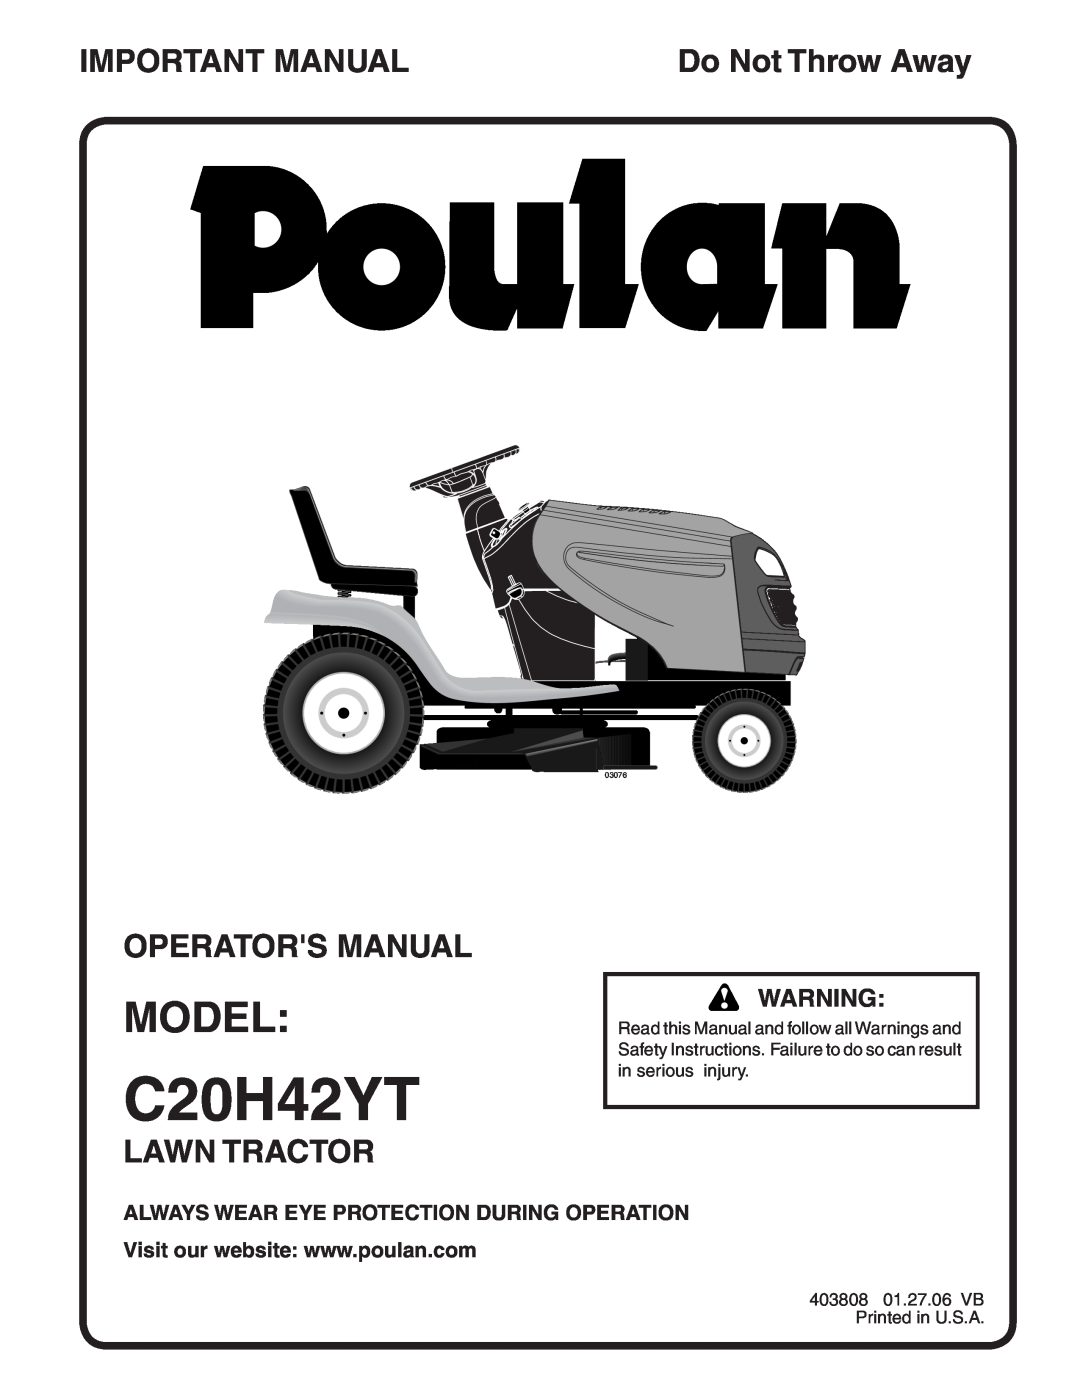 Poulan 403808 manual Model, Important Manual, Operators Manual, Lawn Tractor, Always Wear Eye Protection During Operation 